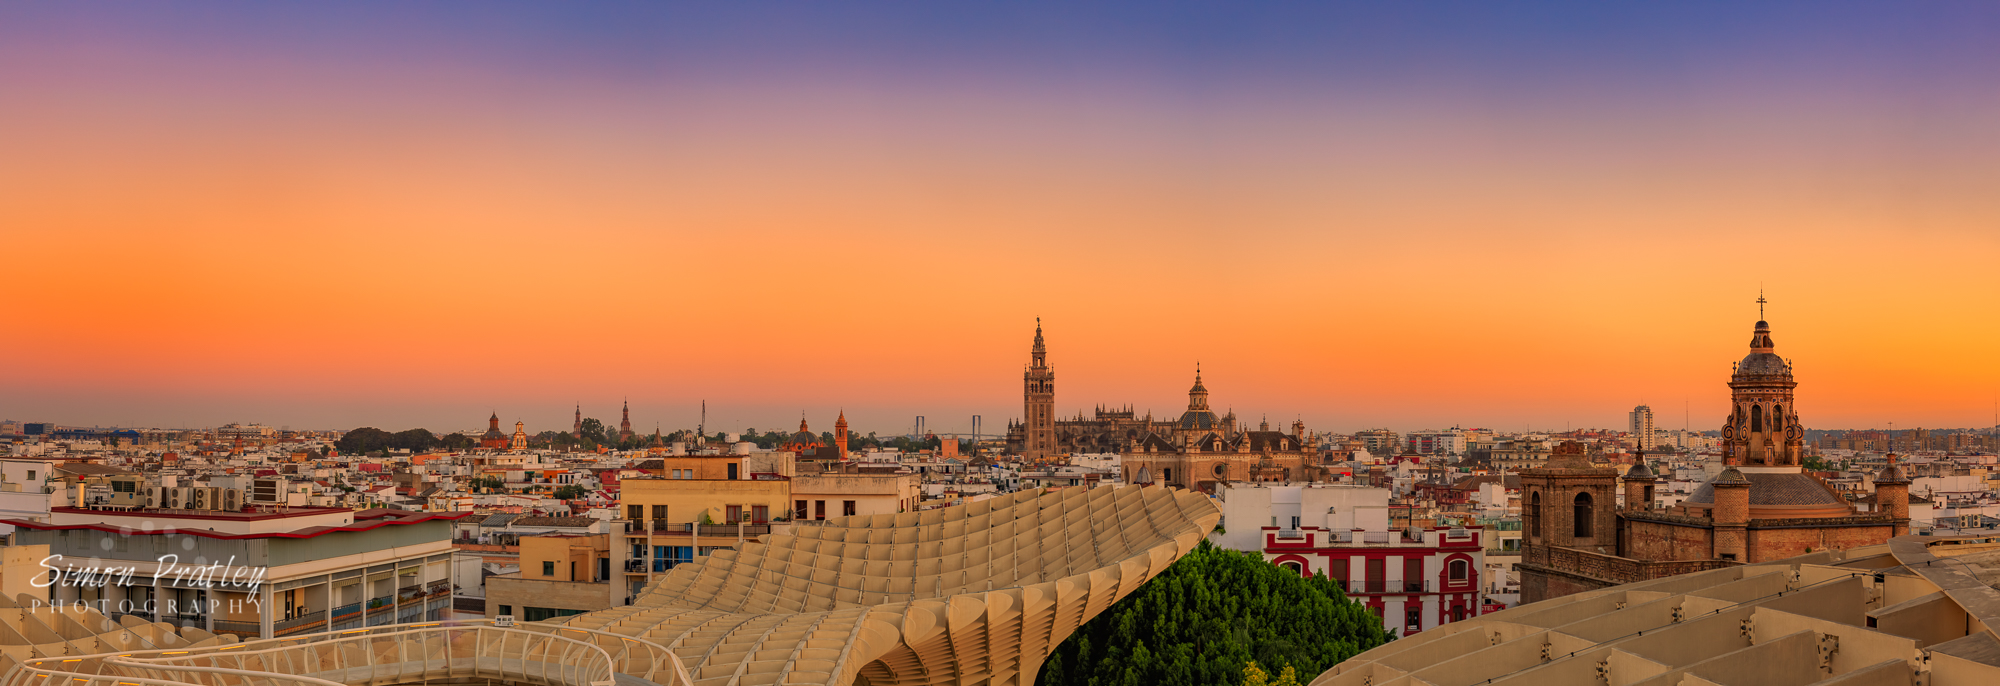 The Rooftops of Seville